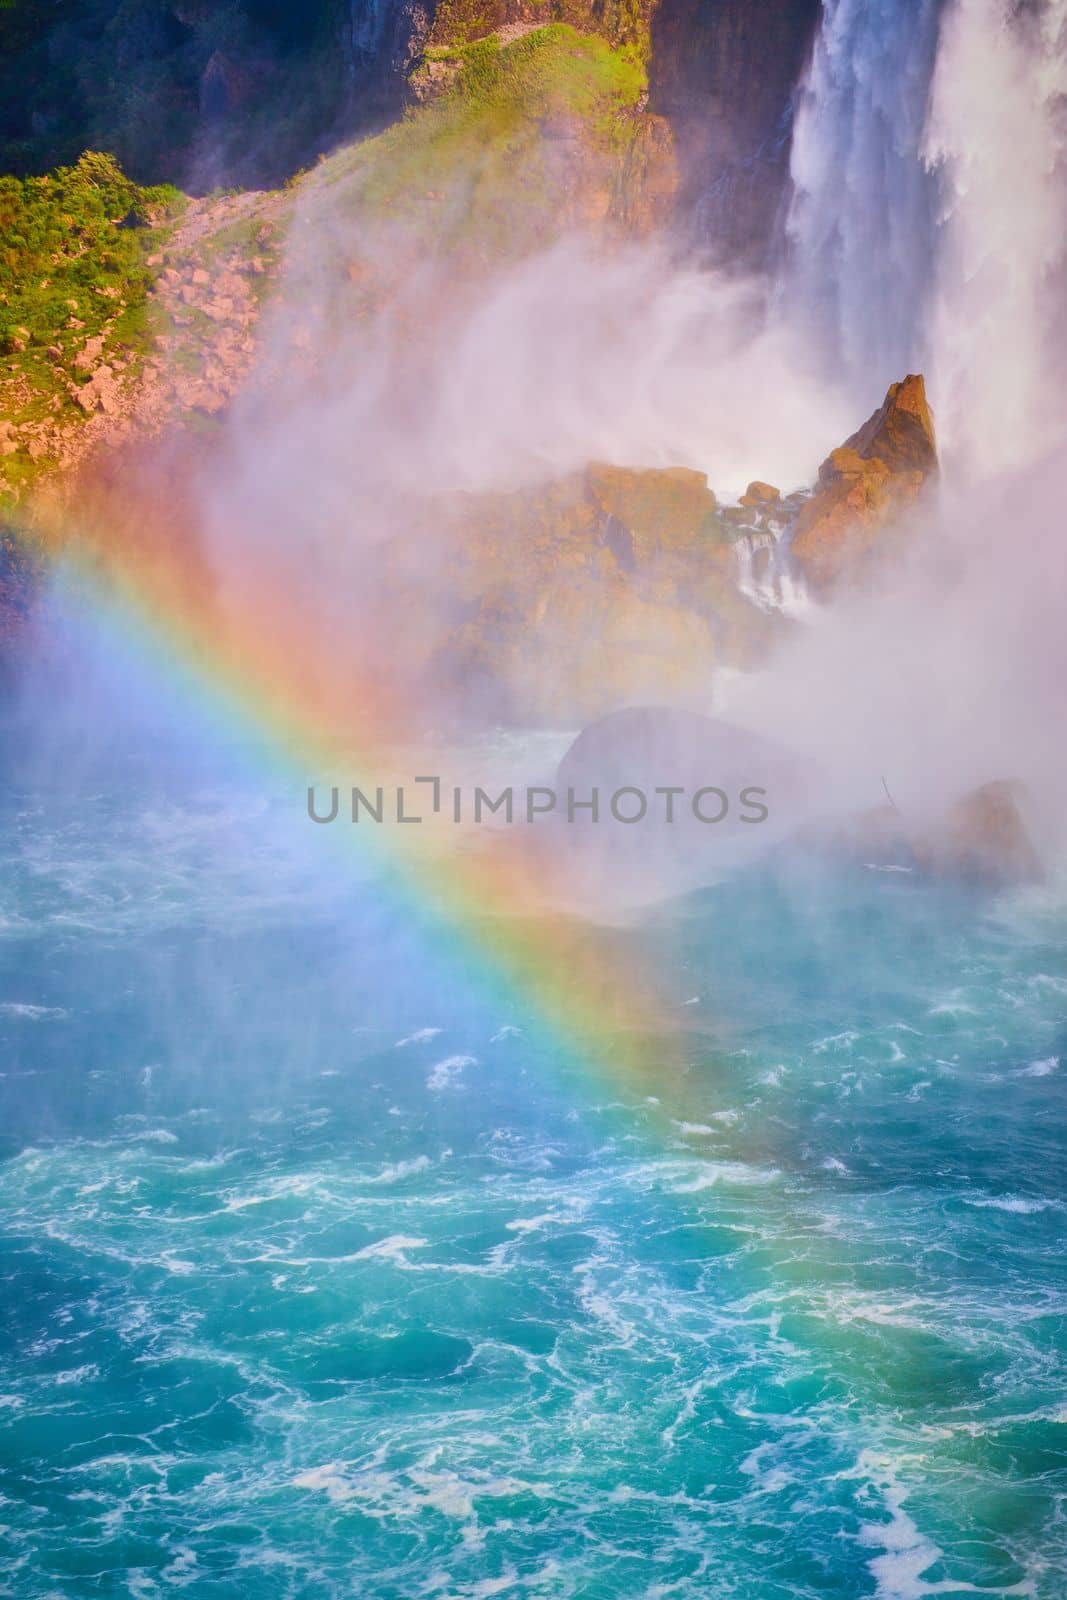 Image of Rainbow crossing through Niagara River with American Falls behind in detail